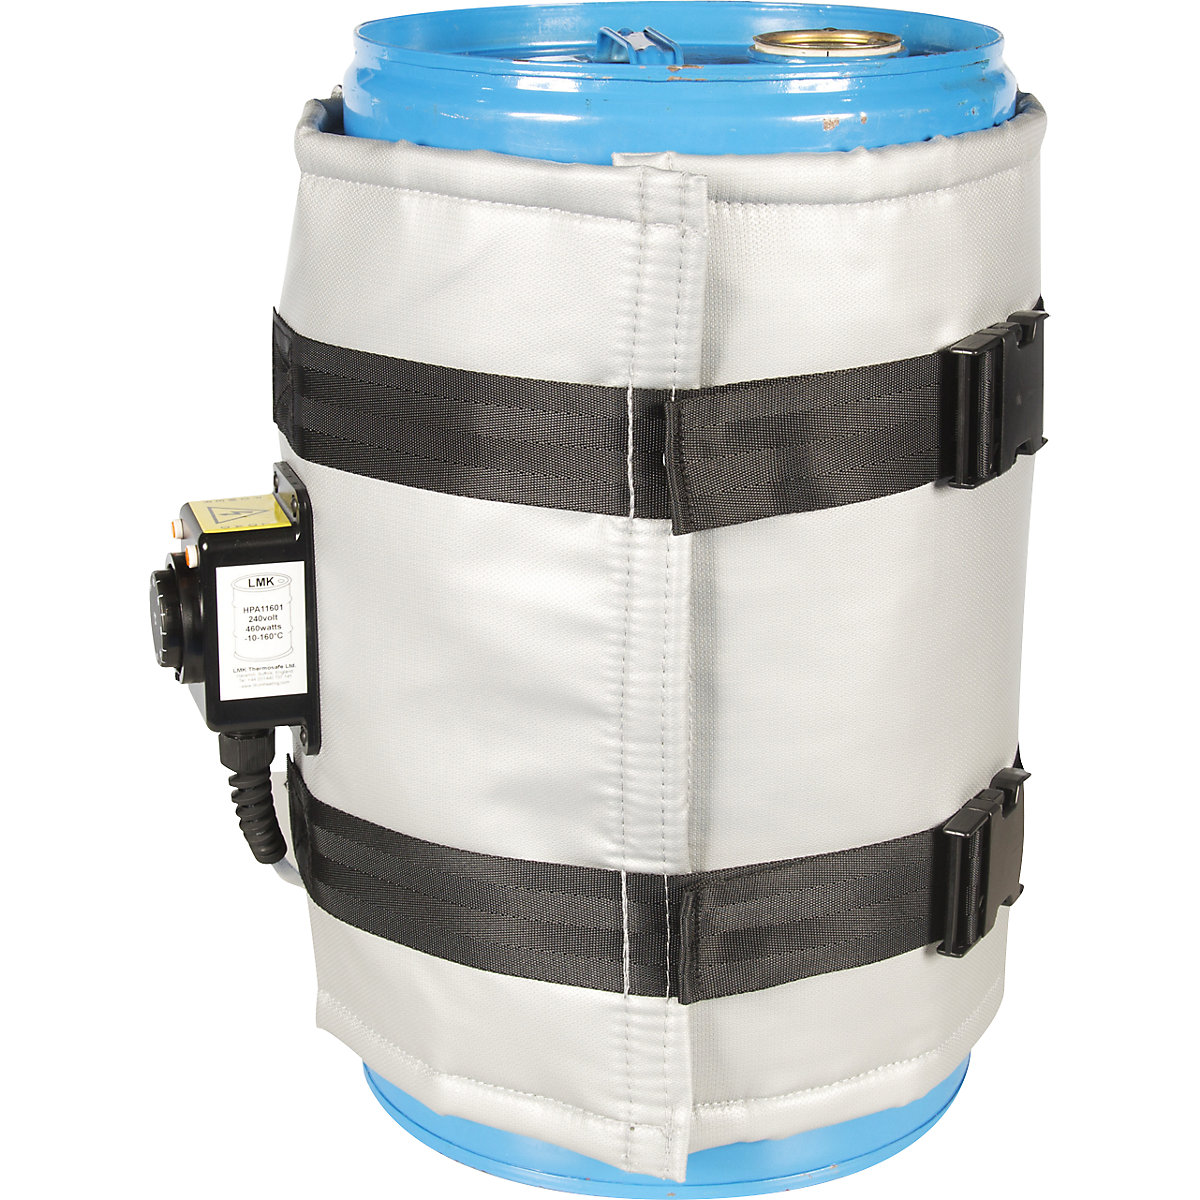 MAX canister/drum heating jacket